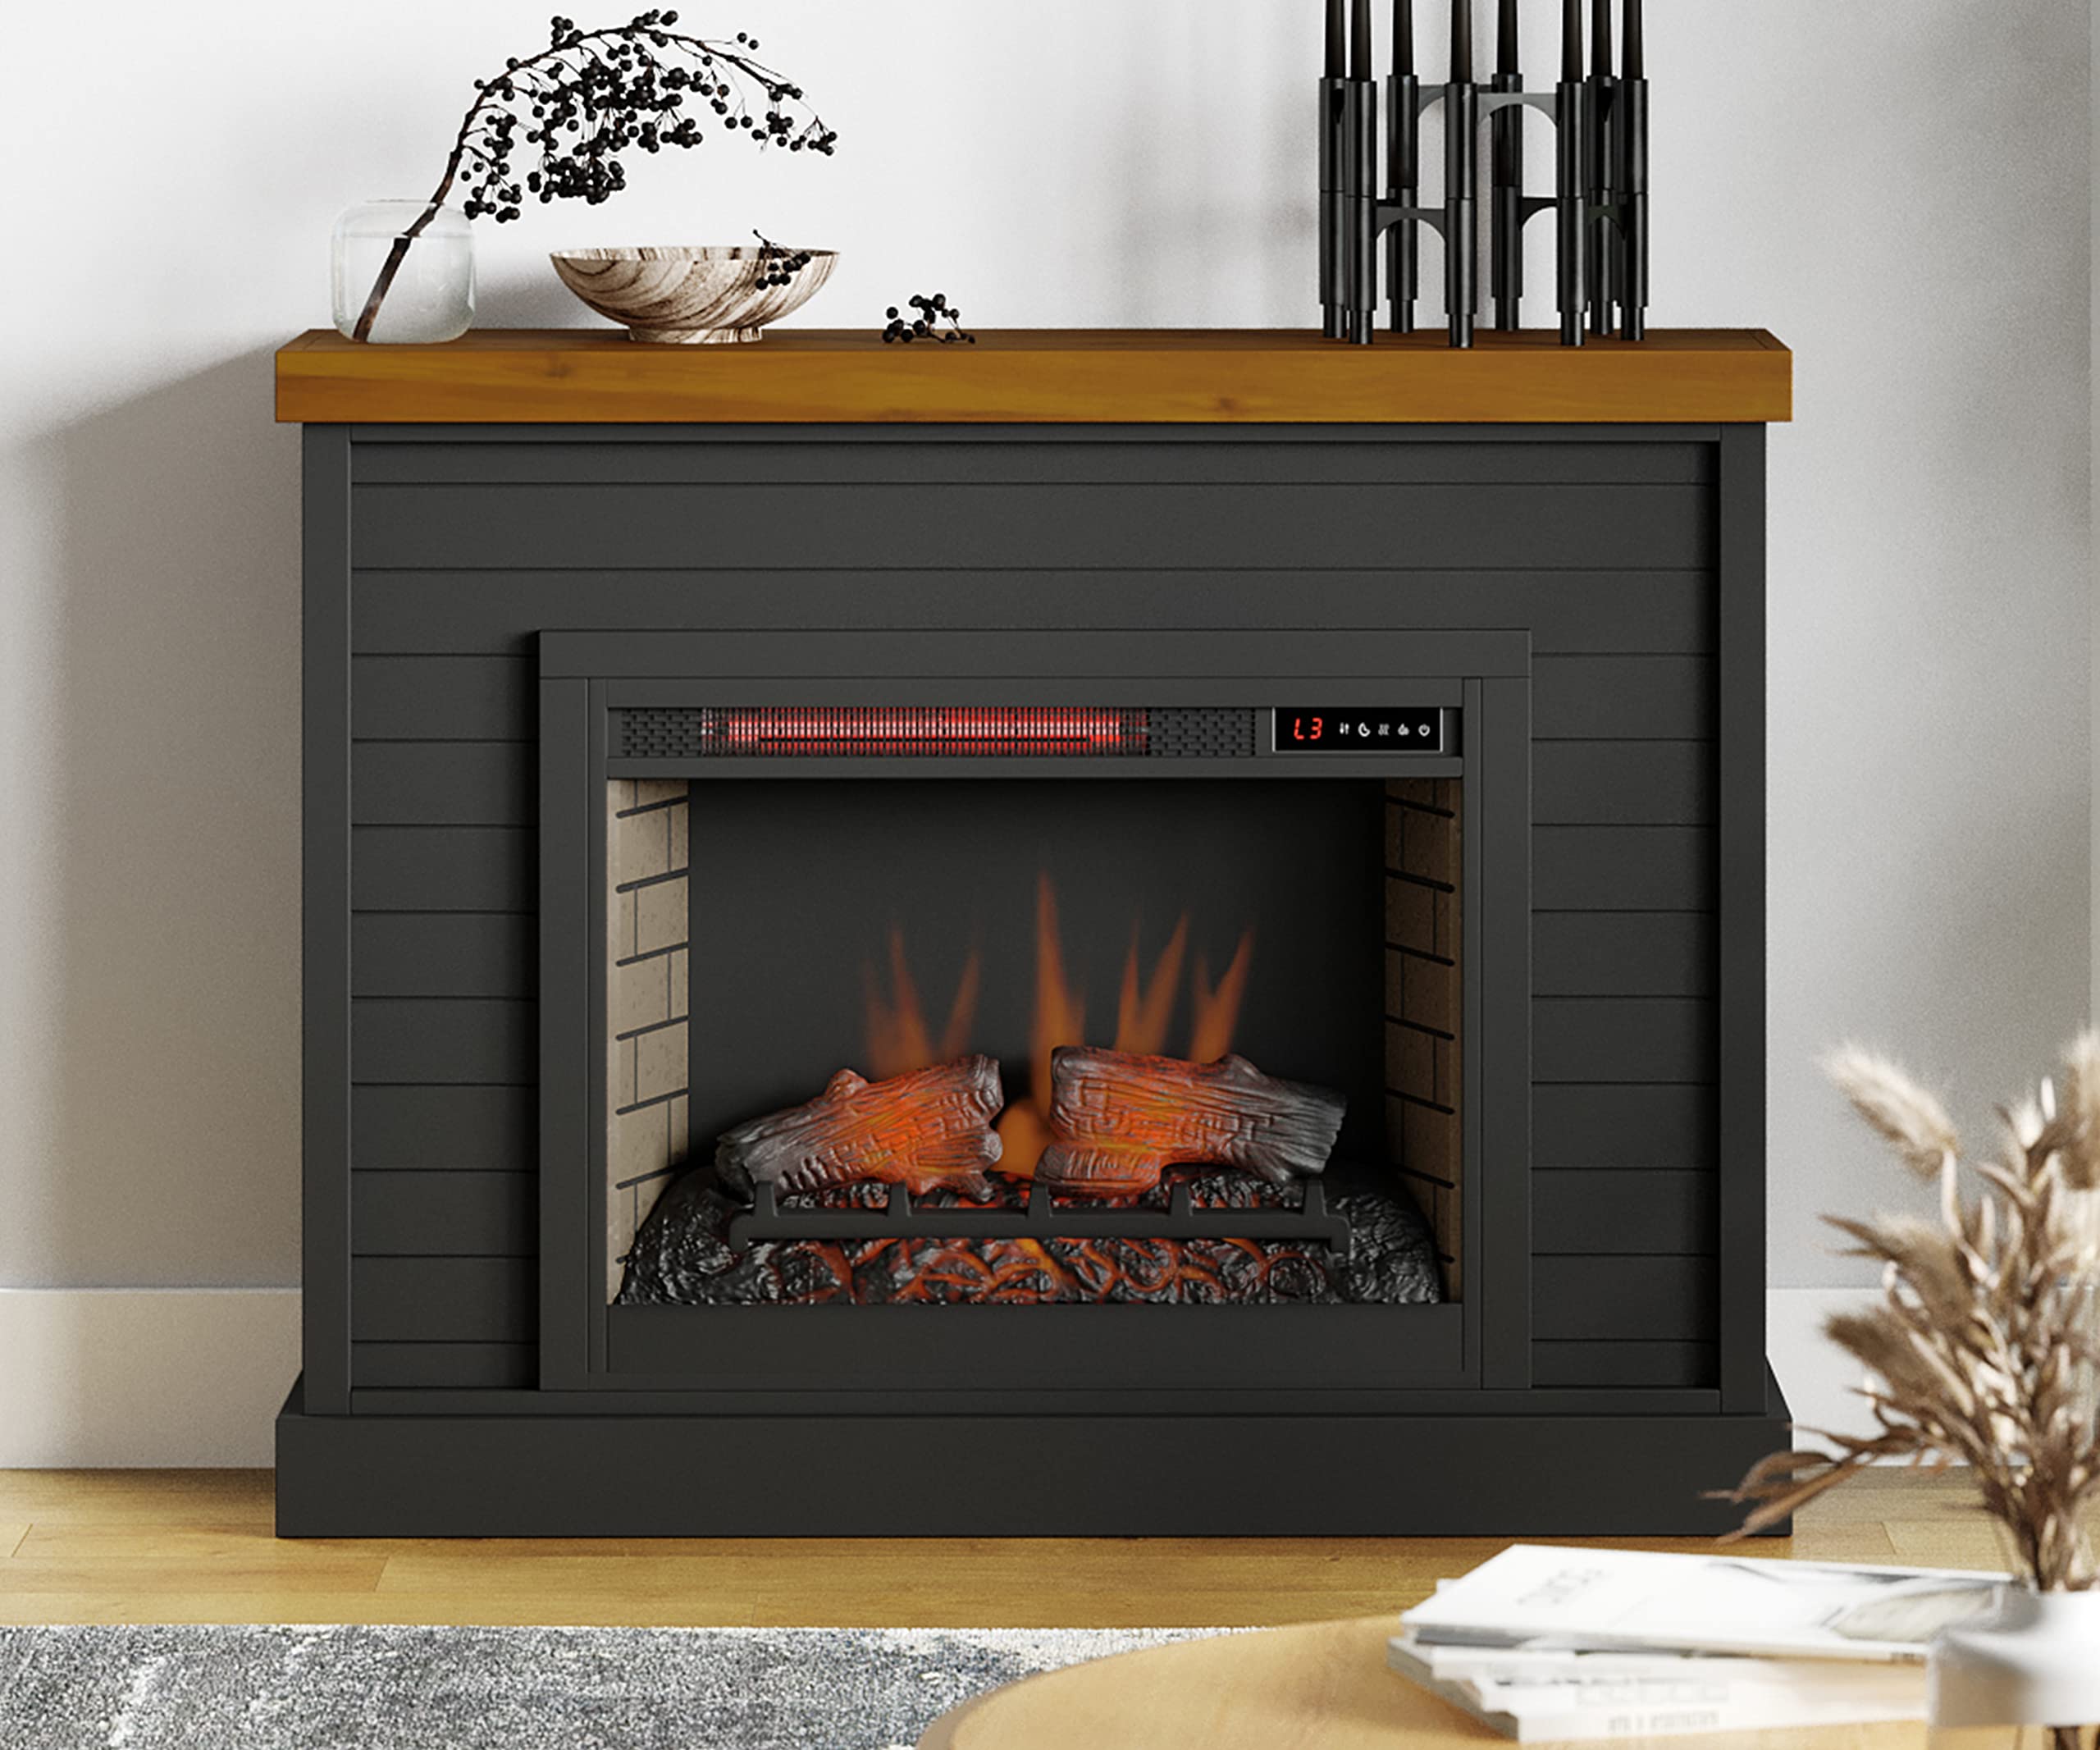 Bridgevine Home Washington Modern Farmhouse Electric Fireplace with Mantel, 48 inches, Poplar and Knotty Alder Solid Wood, Black and Whiskey Finish